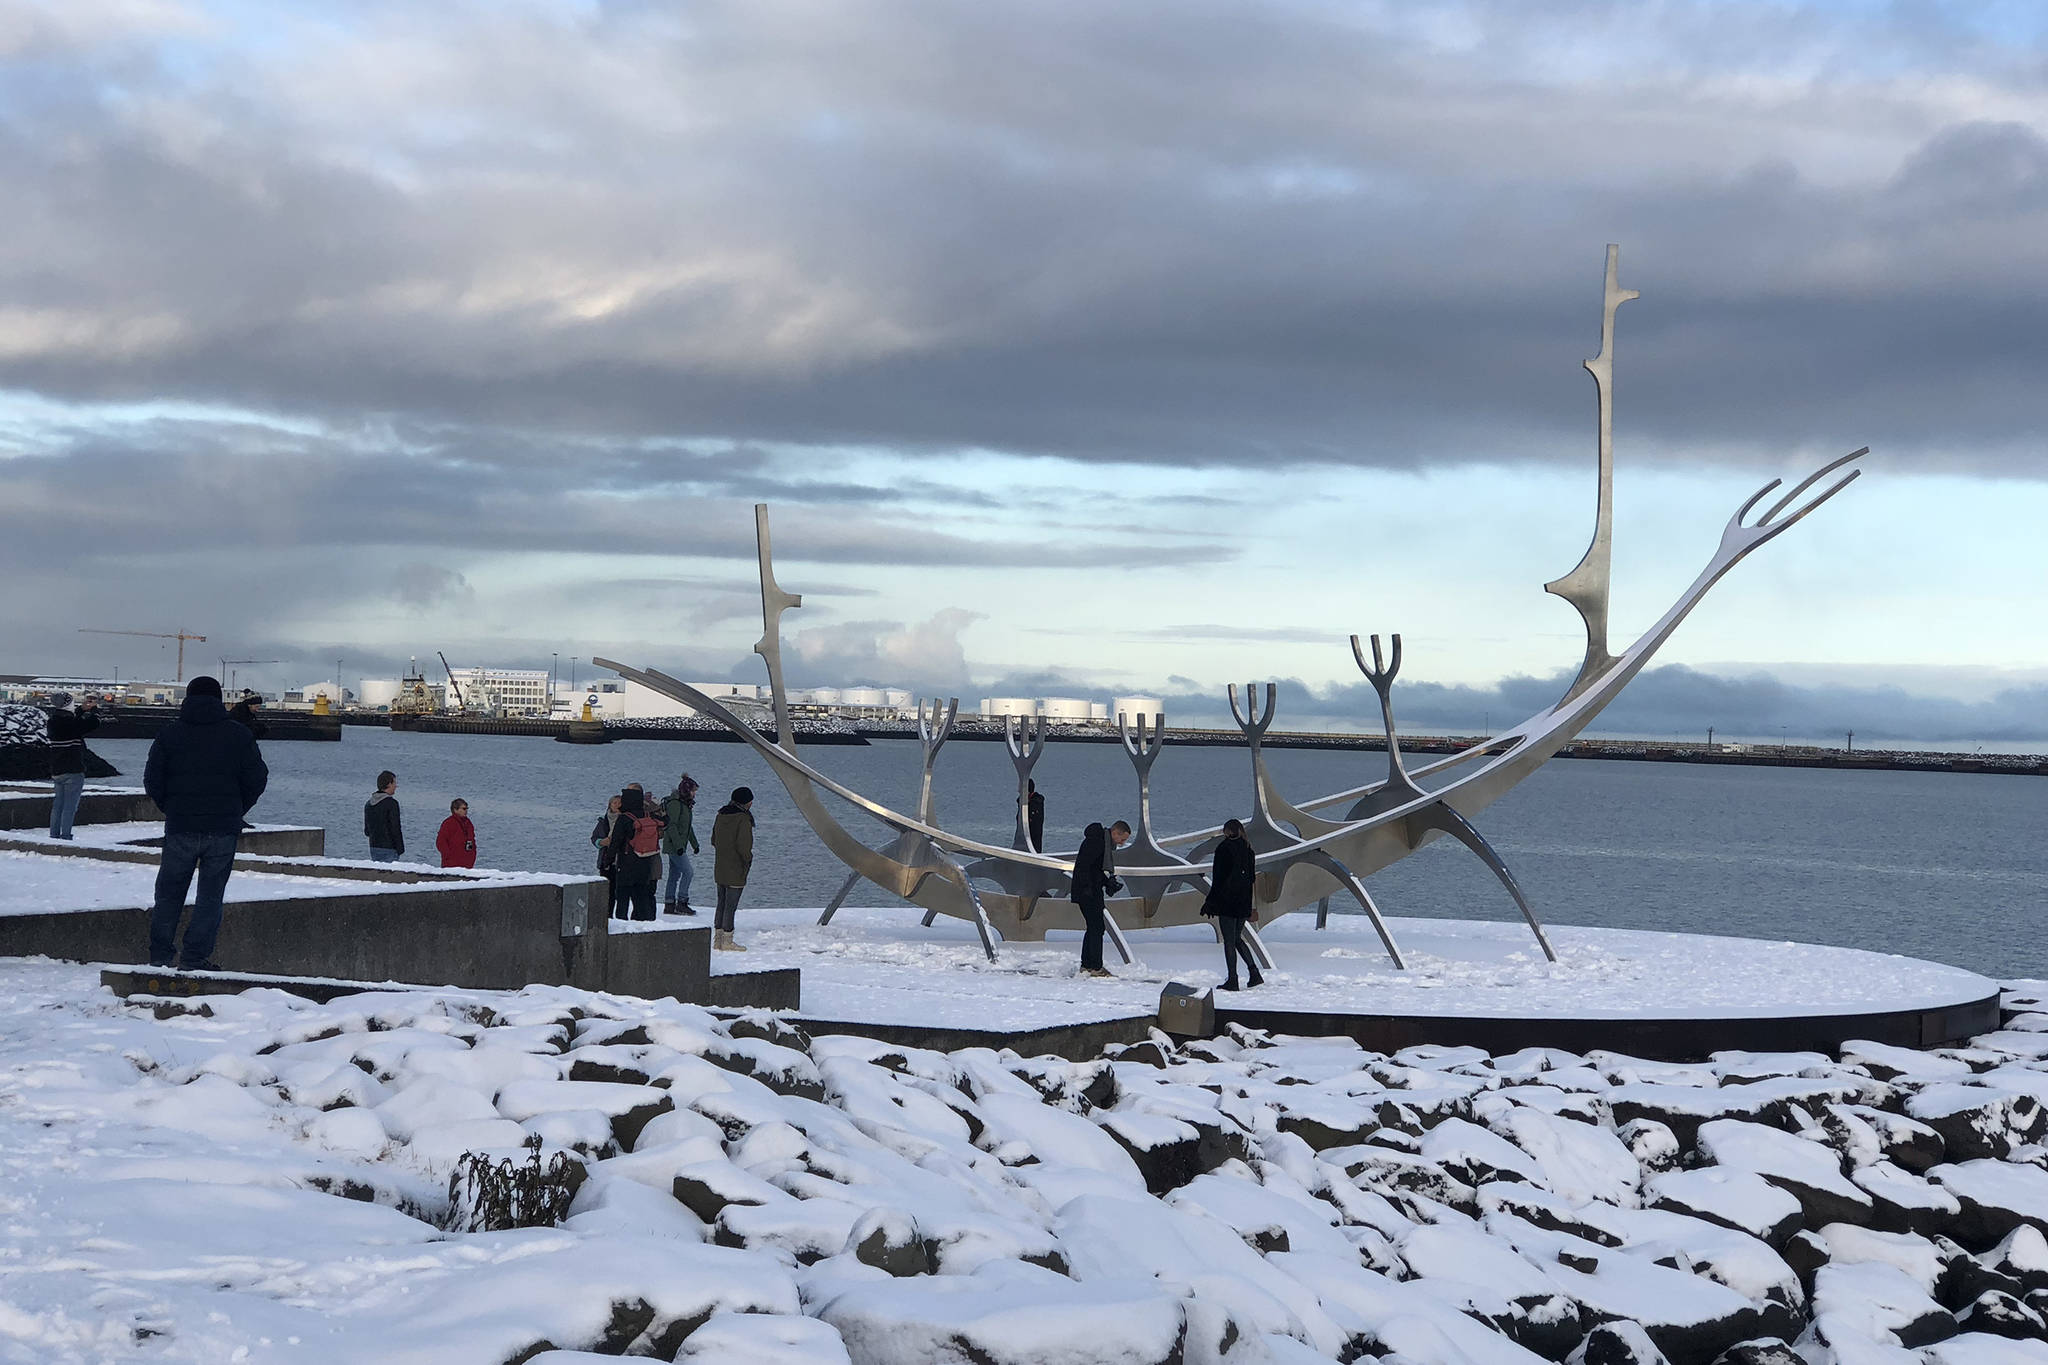 A viking ship statue is pictured in downtown Reykjavik, Iceland, November 2018. (Emily Russo Miller | Juneau Empire)